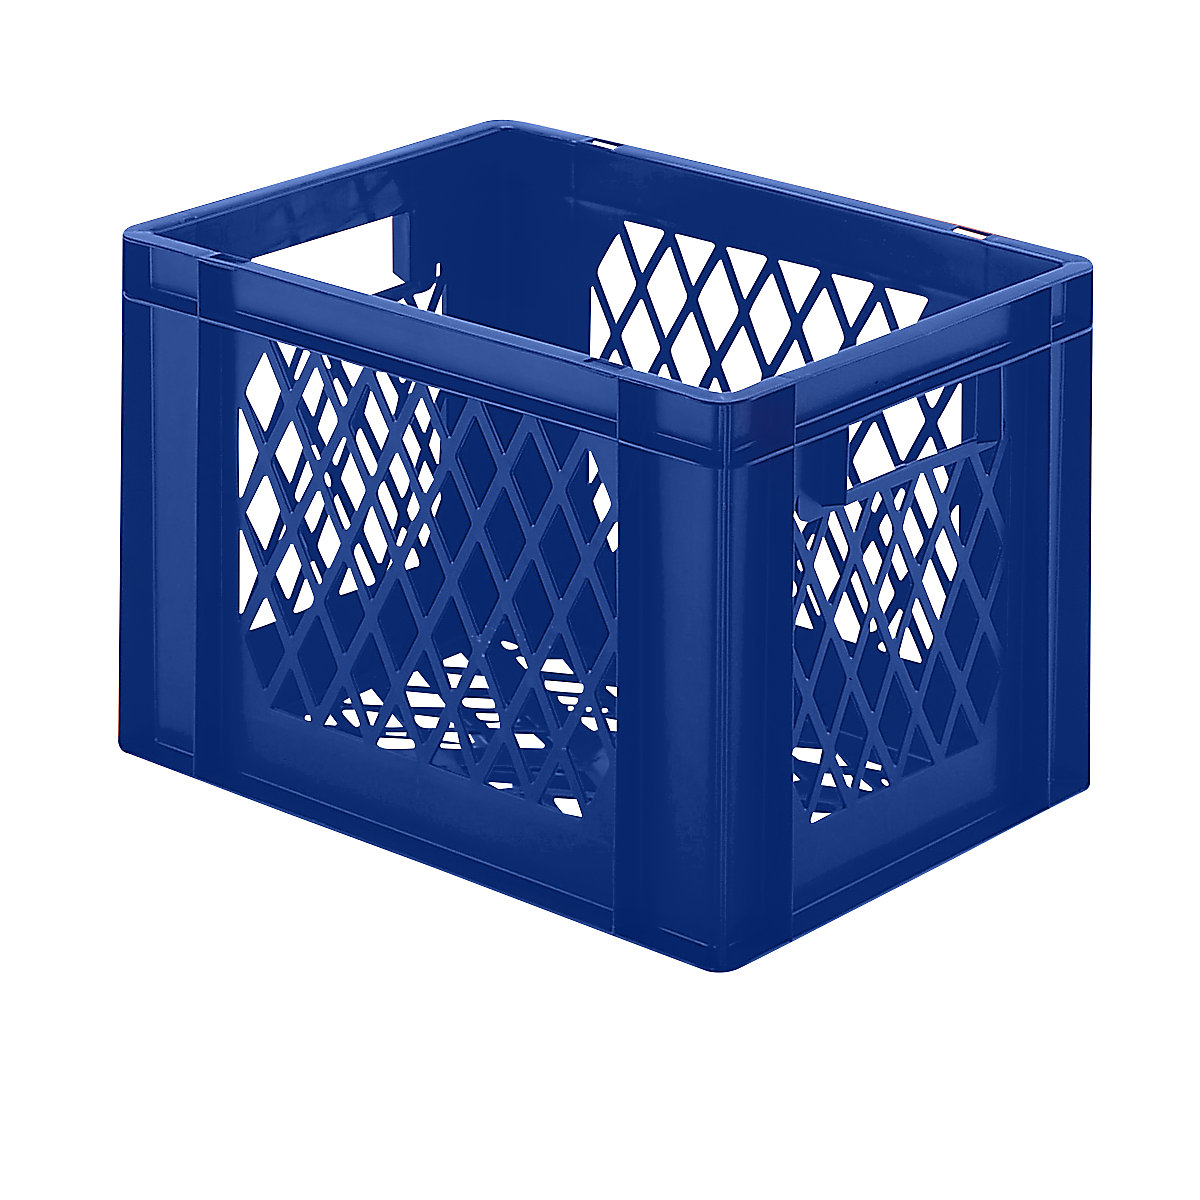 Euro stacking container, perforated walls and base, LxWxH 400 x 300 x 266 mm, blue, pack of 5